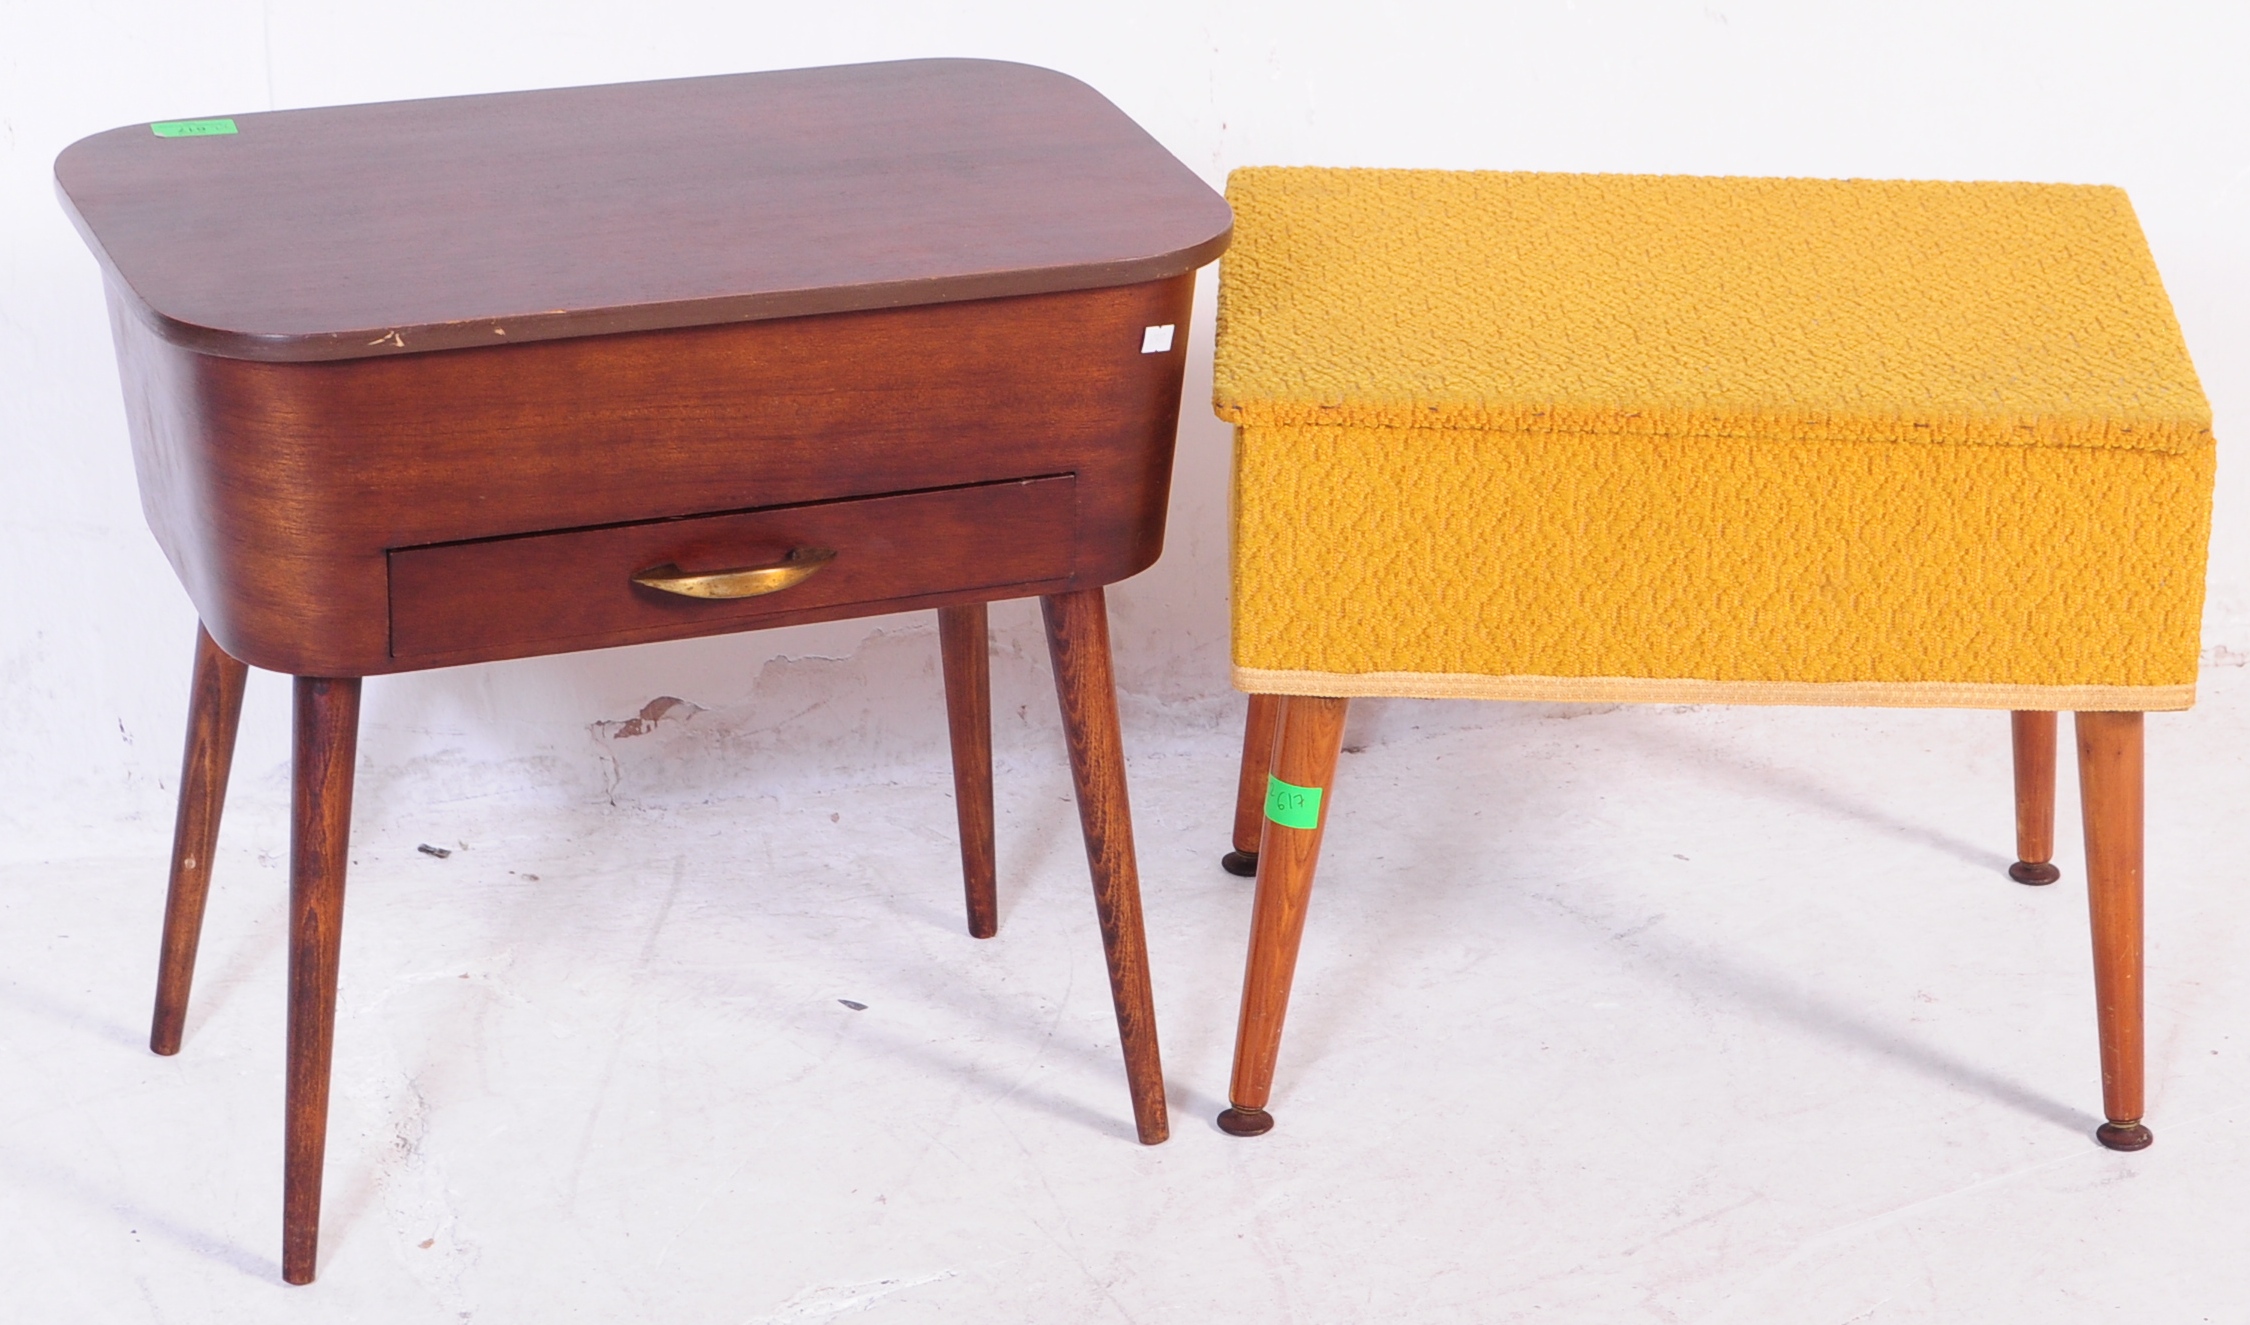 TWO MID CENTURY TEAK UPHOLSTERED SEWING BOXES - Image 2 of 6